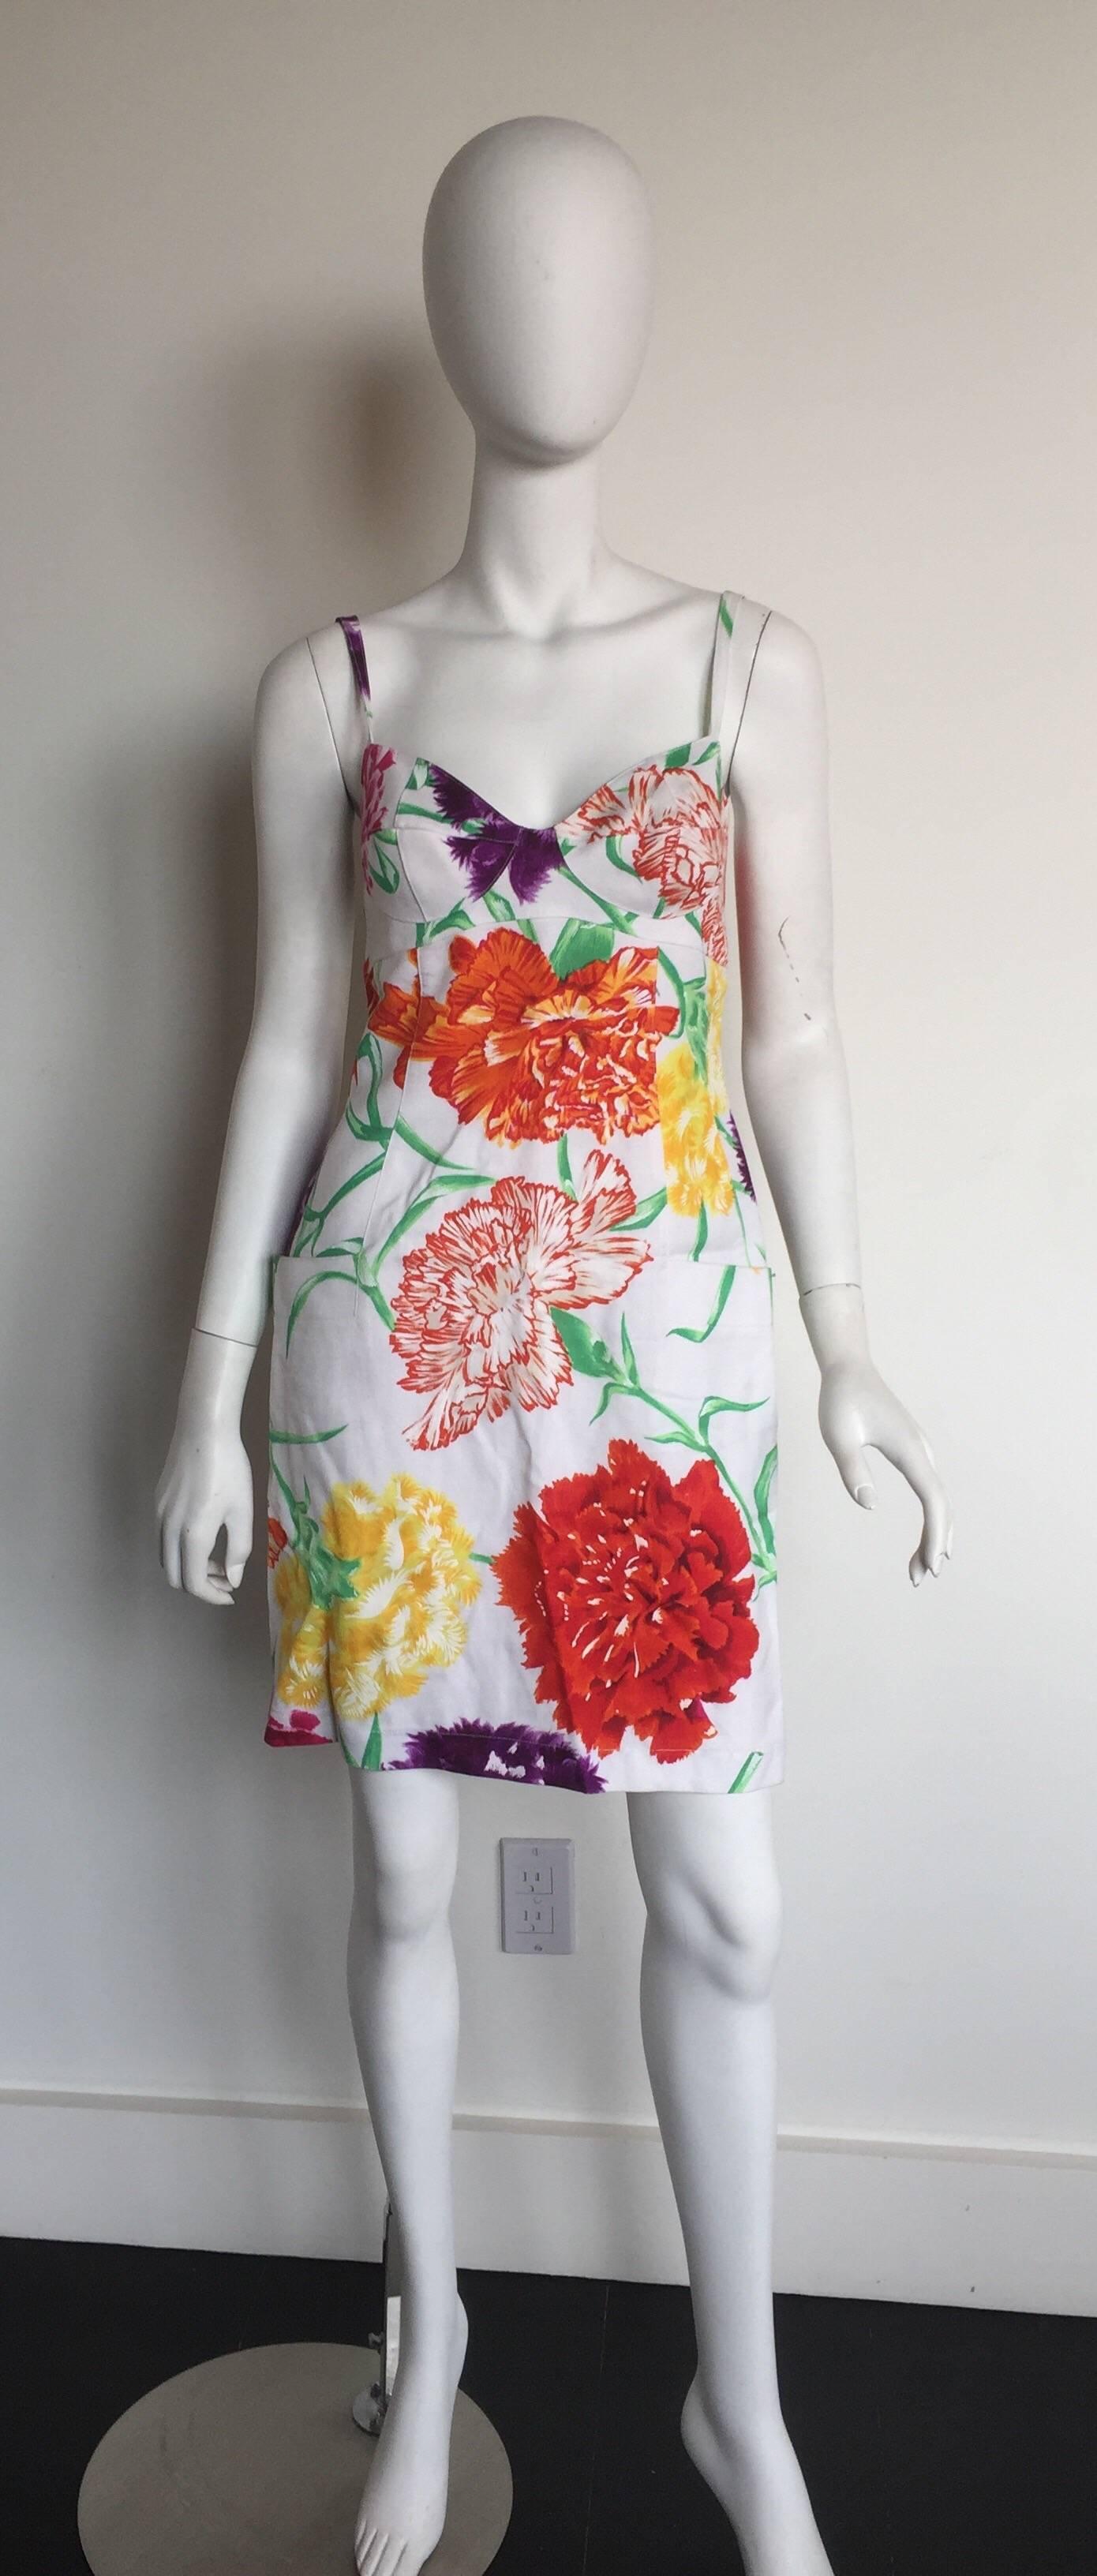 This linen dress is from the 1980s.  Spaghetti strapped sweat heart neckline floral dress is a great summer dress. Color pallet of bright oranges and white creates the mood for summer. With a short length and blended in patch pockets is what makes